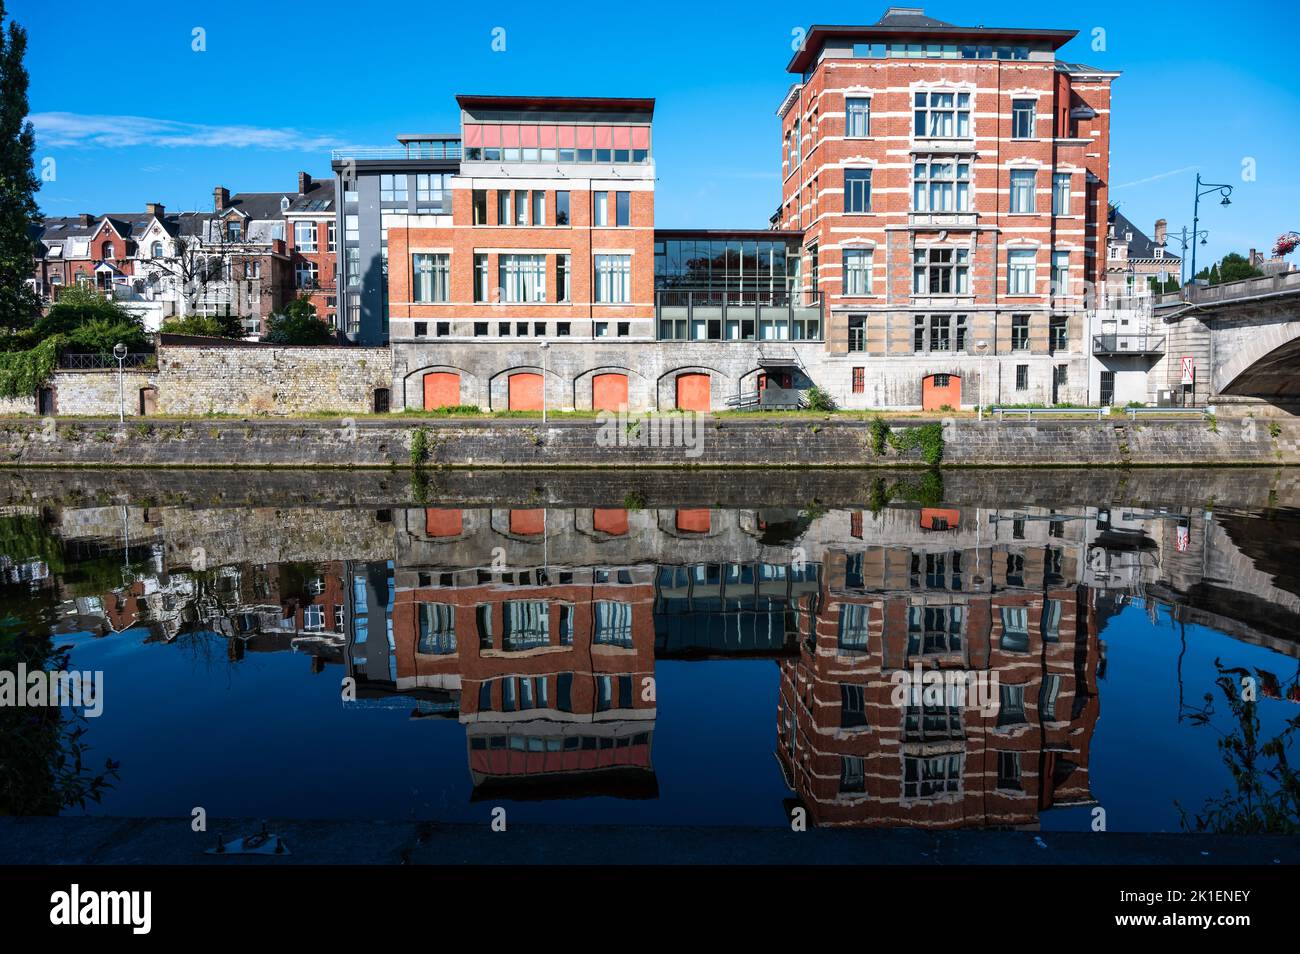 Namur, Wallon Region, Belgium, 07 28 2022 - Historical buildings reflecting in the blue water of the River Sambre Stock Photo